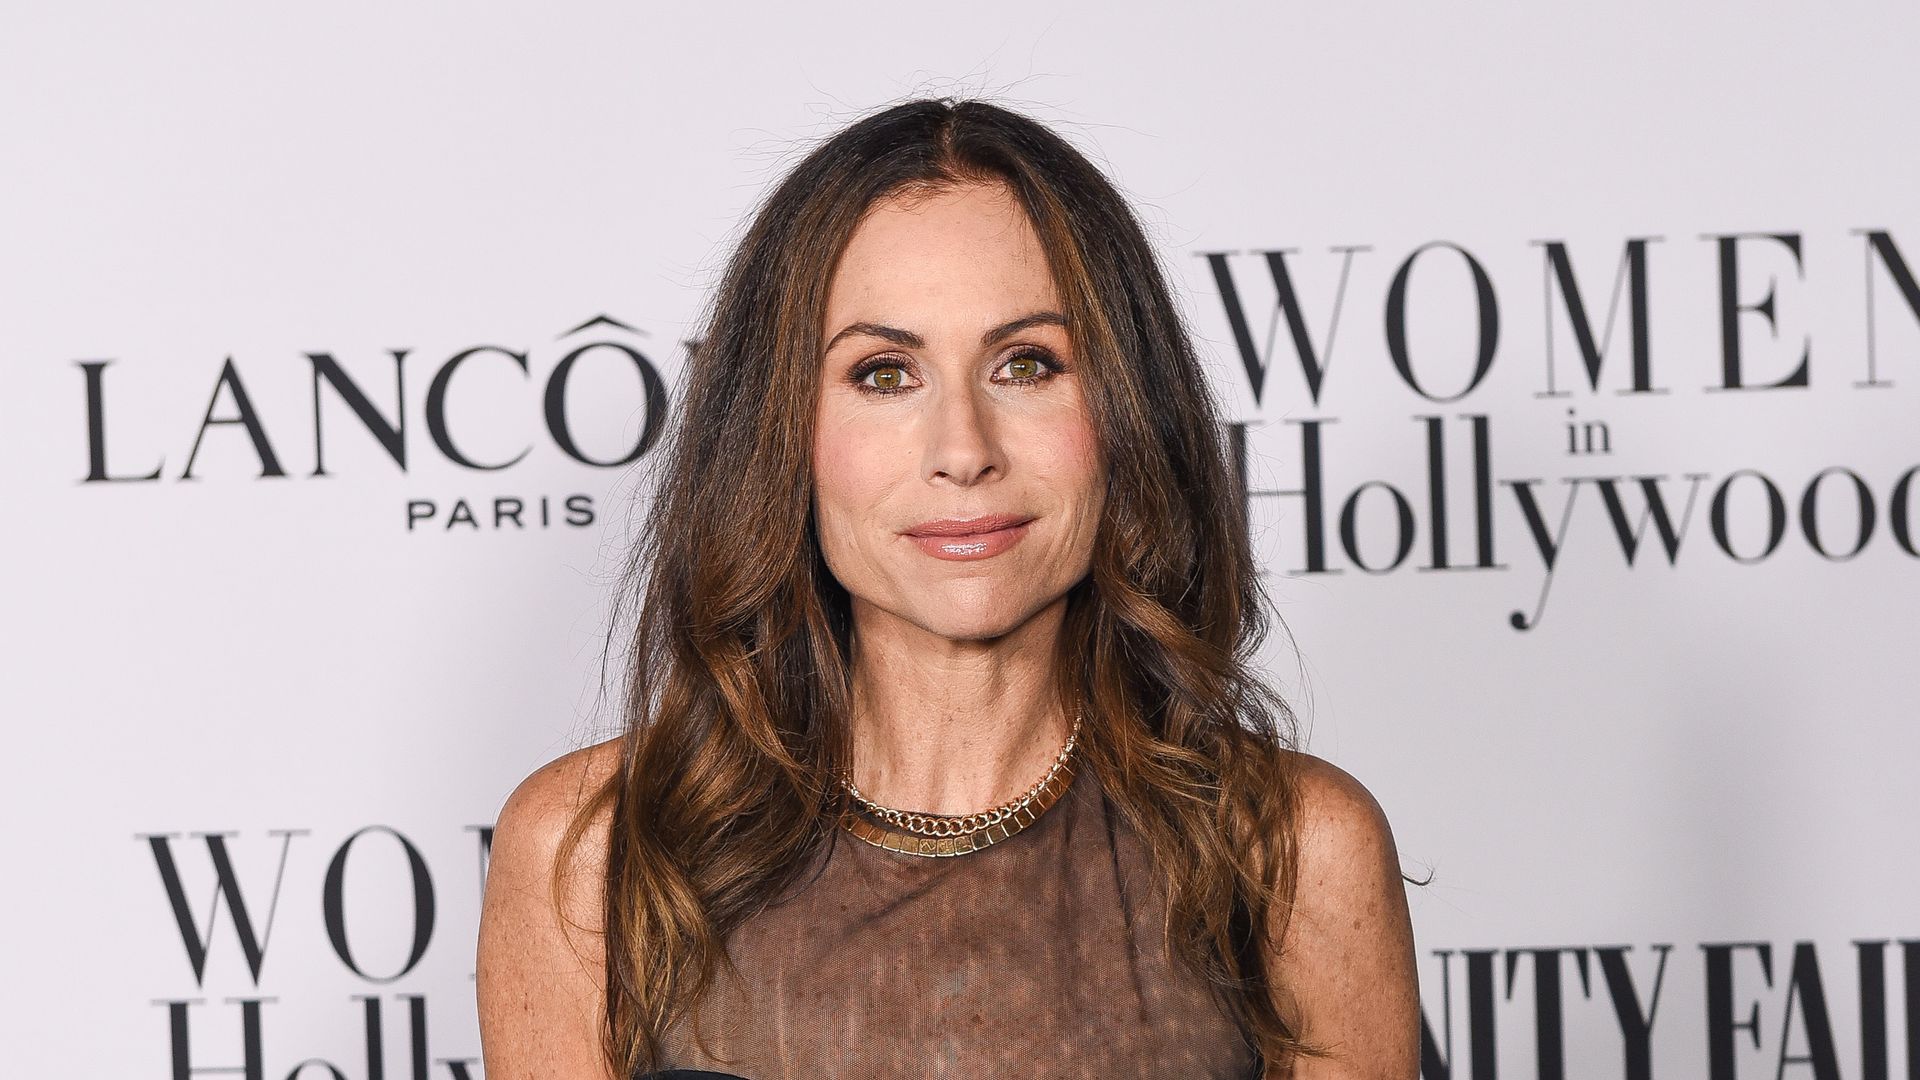 Minnie Driver attends the Vanity Fair and LancÃ´me Women in Hollywood celebration at Soho House on February 06, 2020 in West Hollywood, California